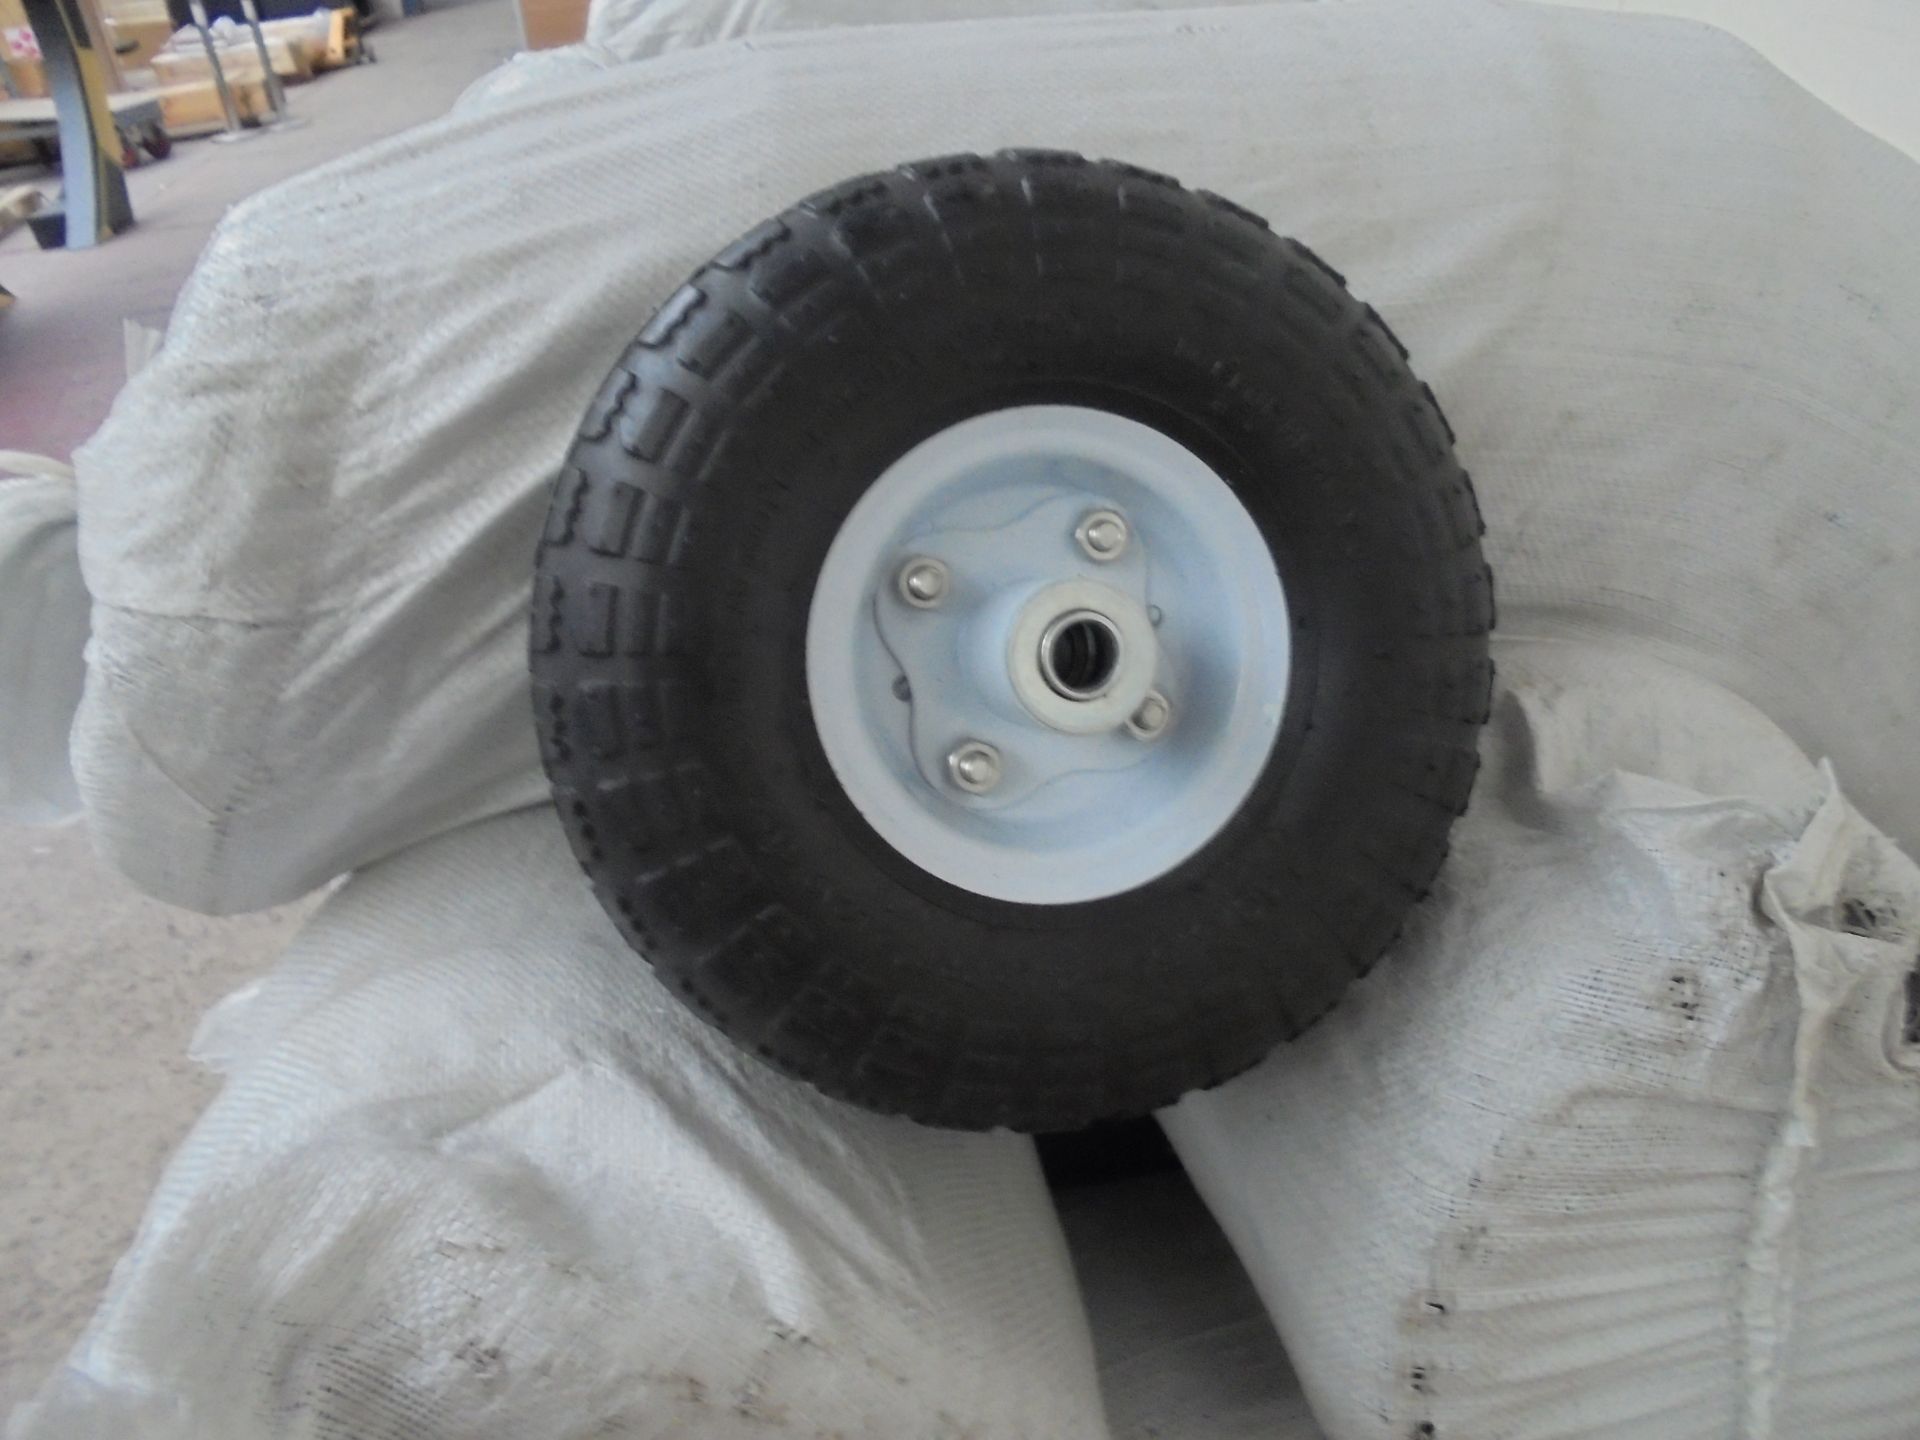 Nylon tube tyre for Heavy duty sack trucks, new and all pumped up.